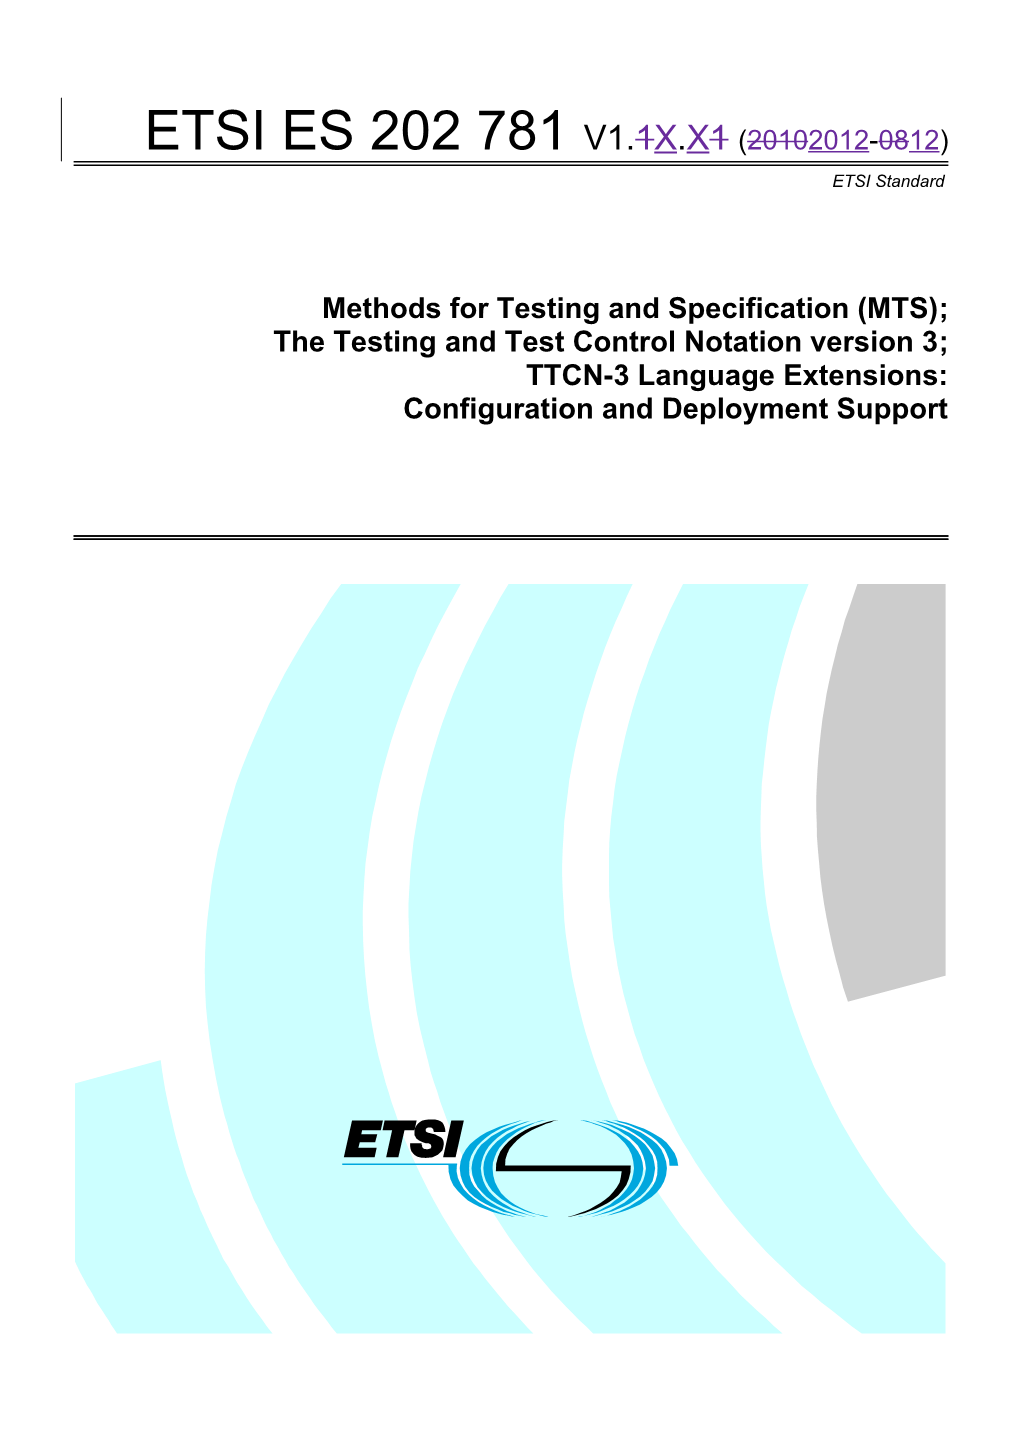 Methods for Testing and Specification (MTS); s2